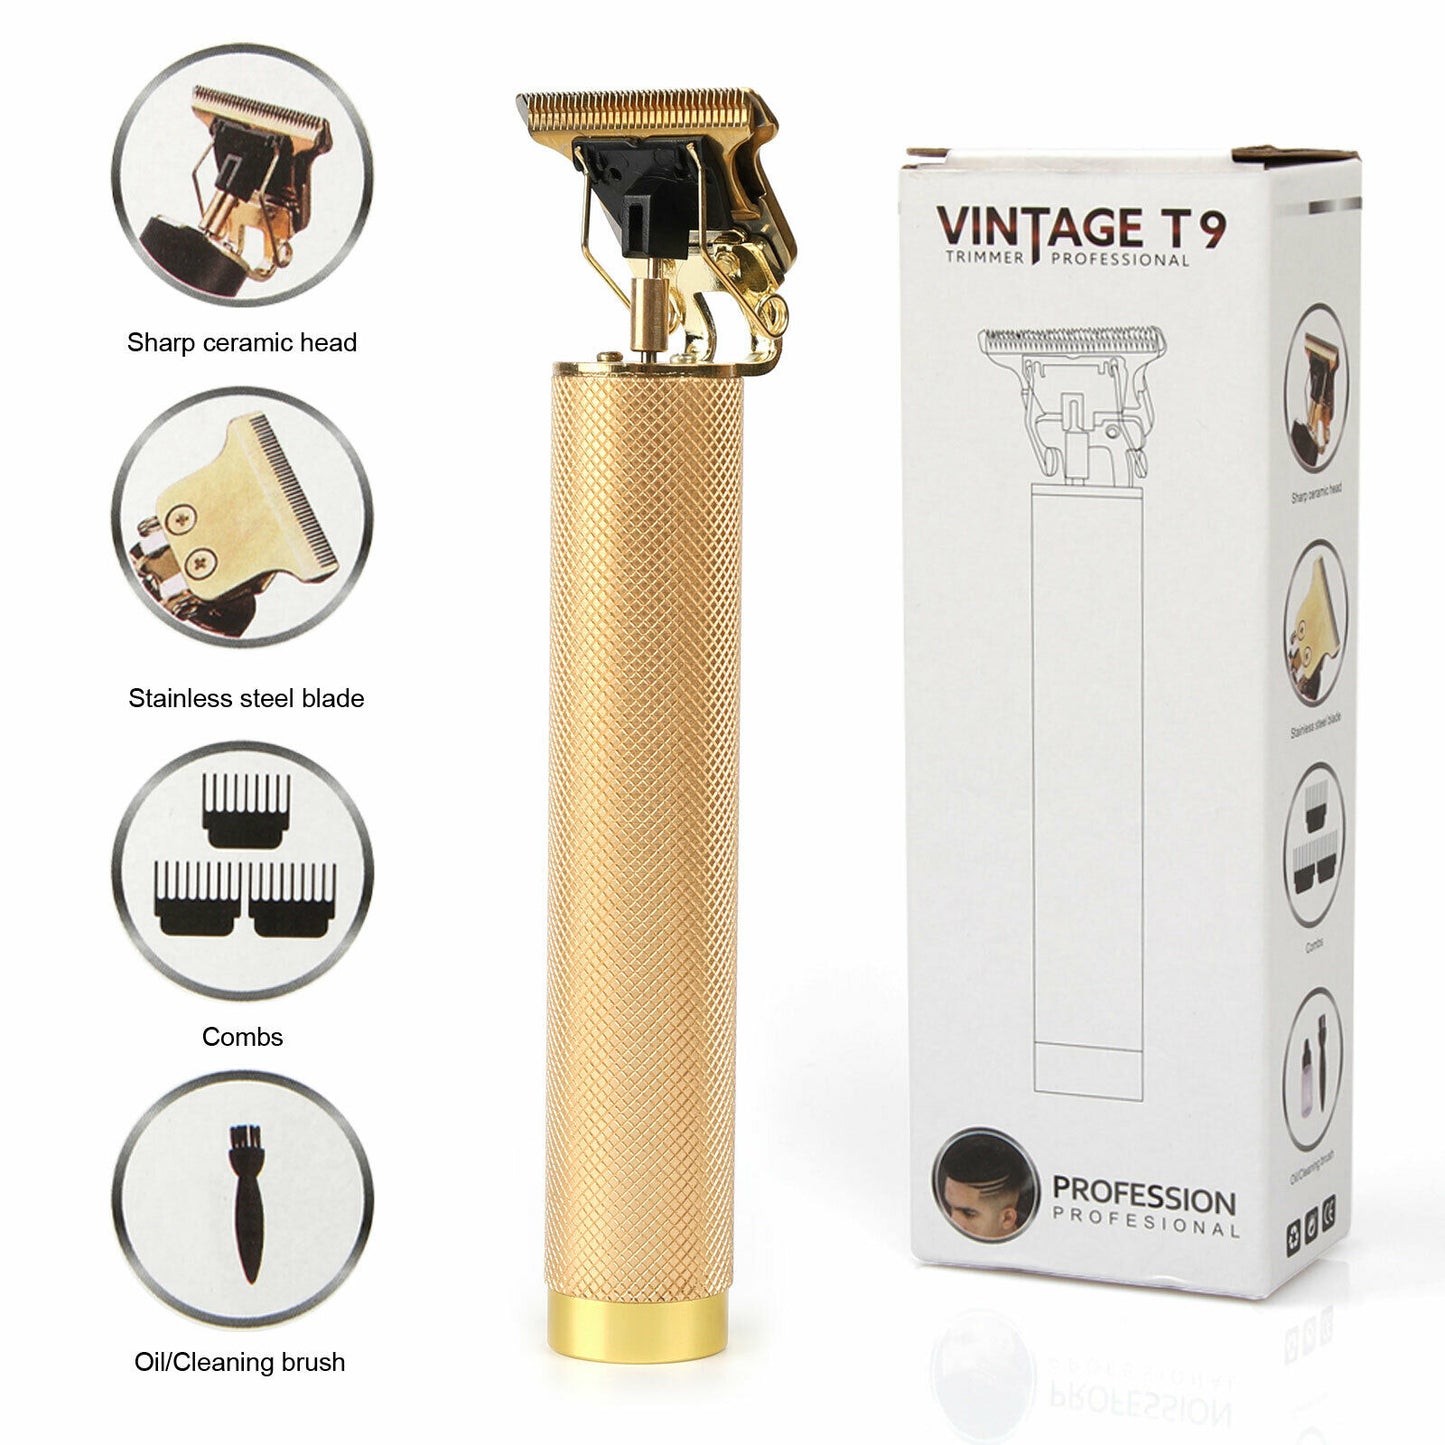 Professional Hair Trimmer , Barbers, USB Electric Hair Clippers Rechargeable, Shaver.